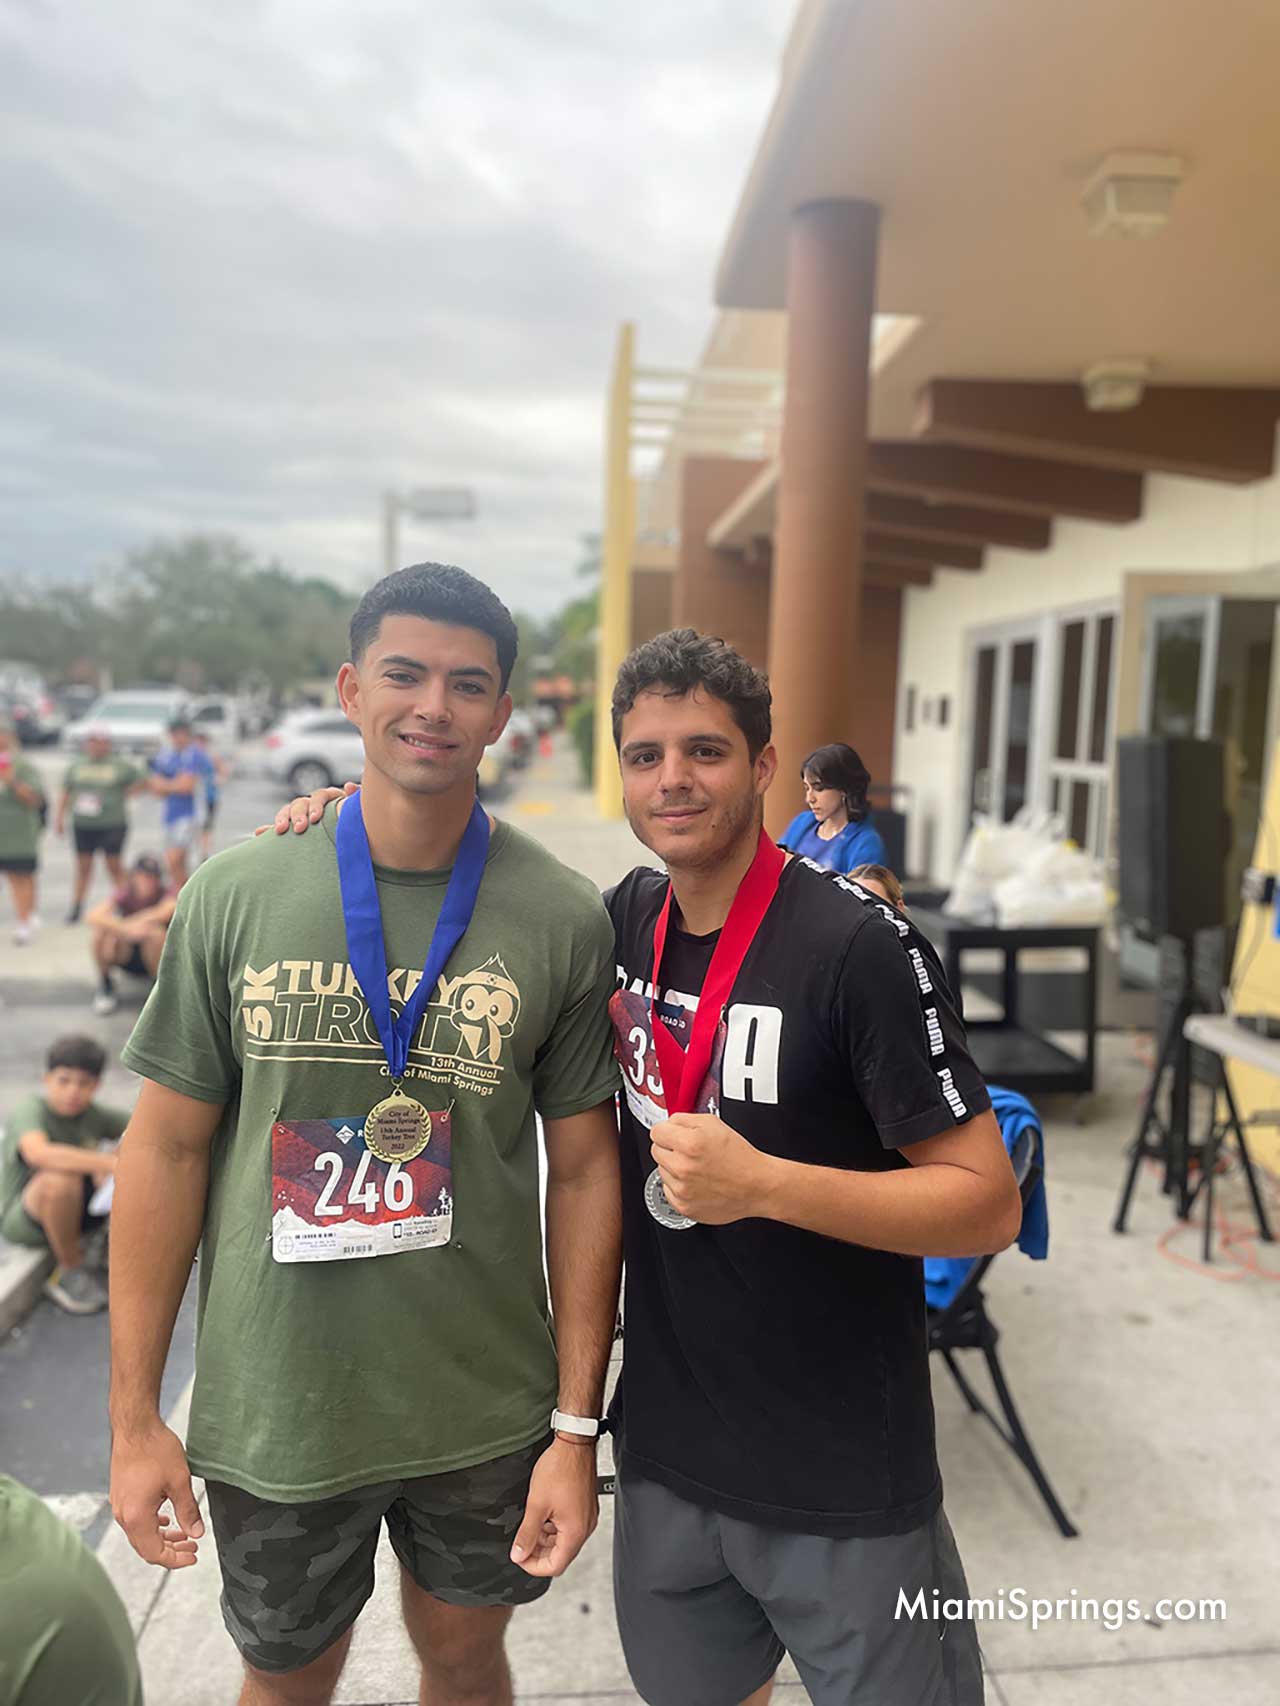 Steven Torres and Orbein Suarez at the Miami Springs Turkey Trot